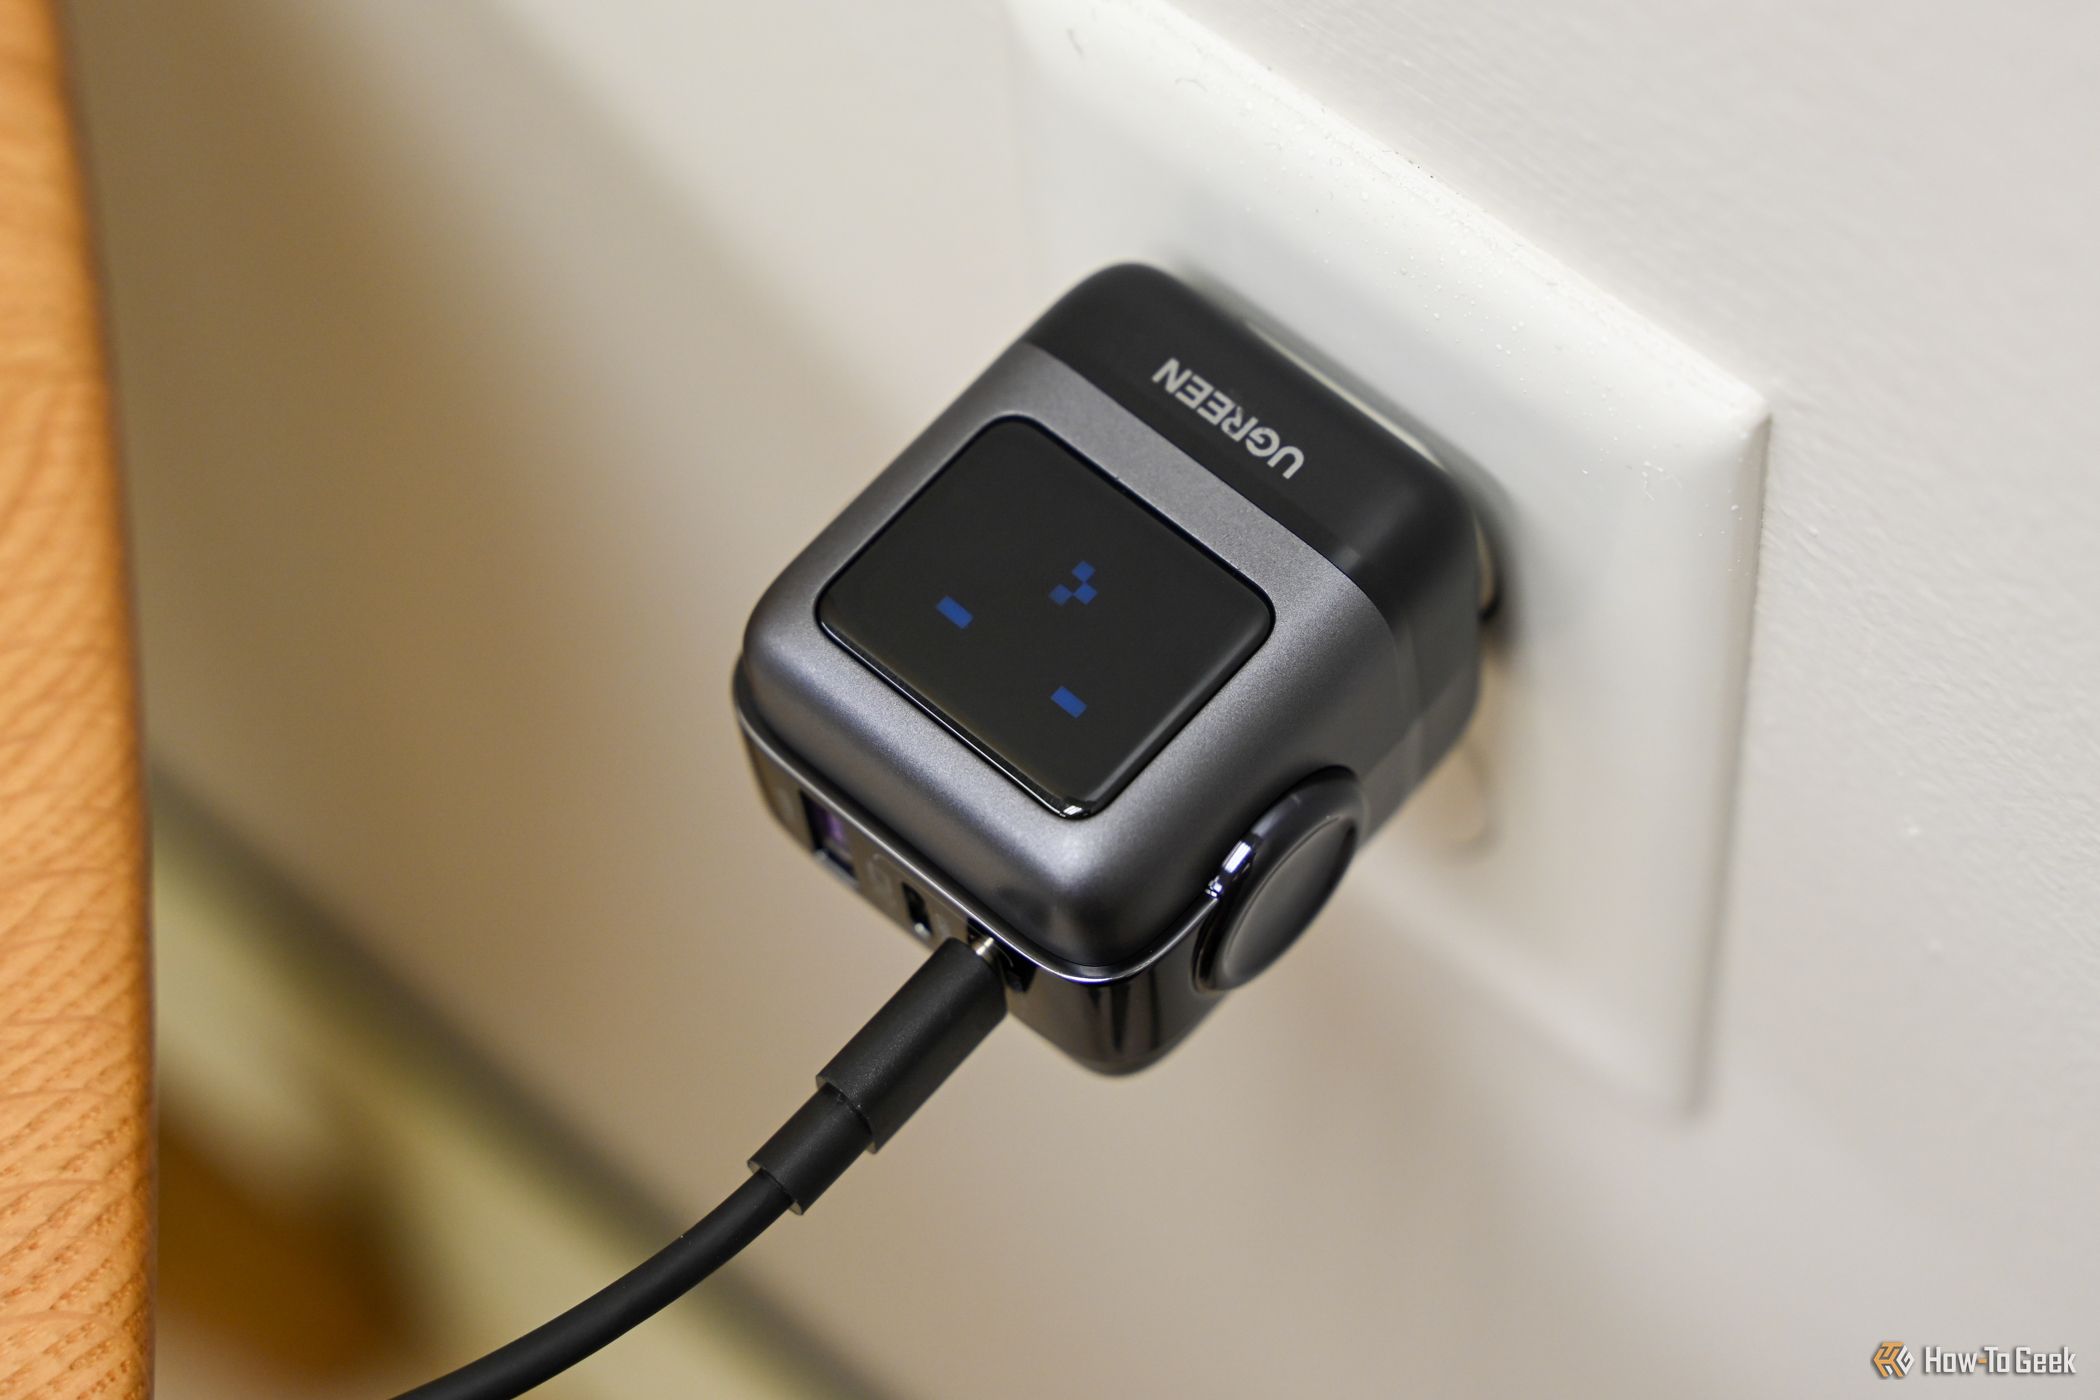 Review of the UGREEN 65W GaN Fast Charger - TurboFuture